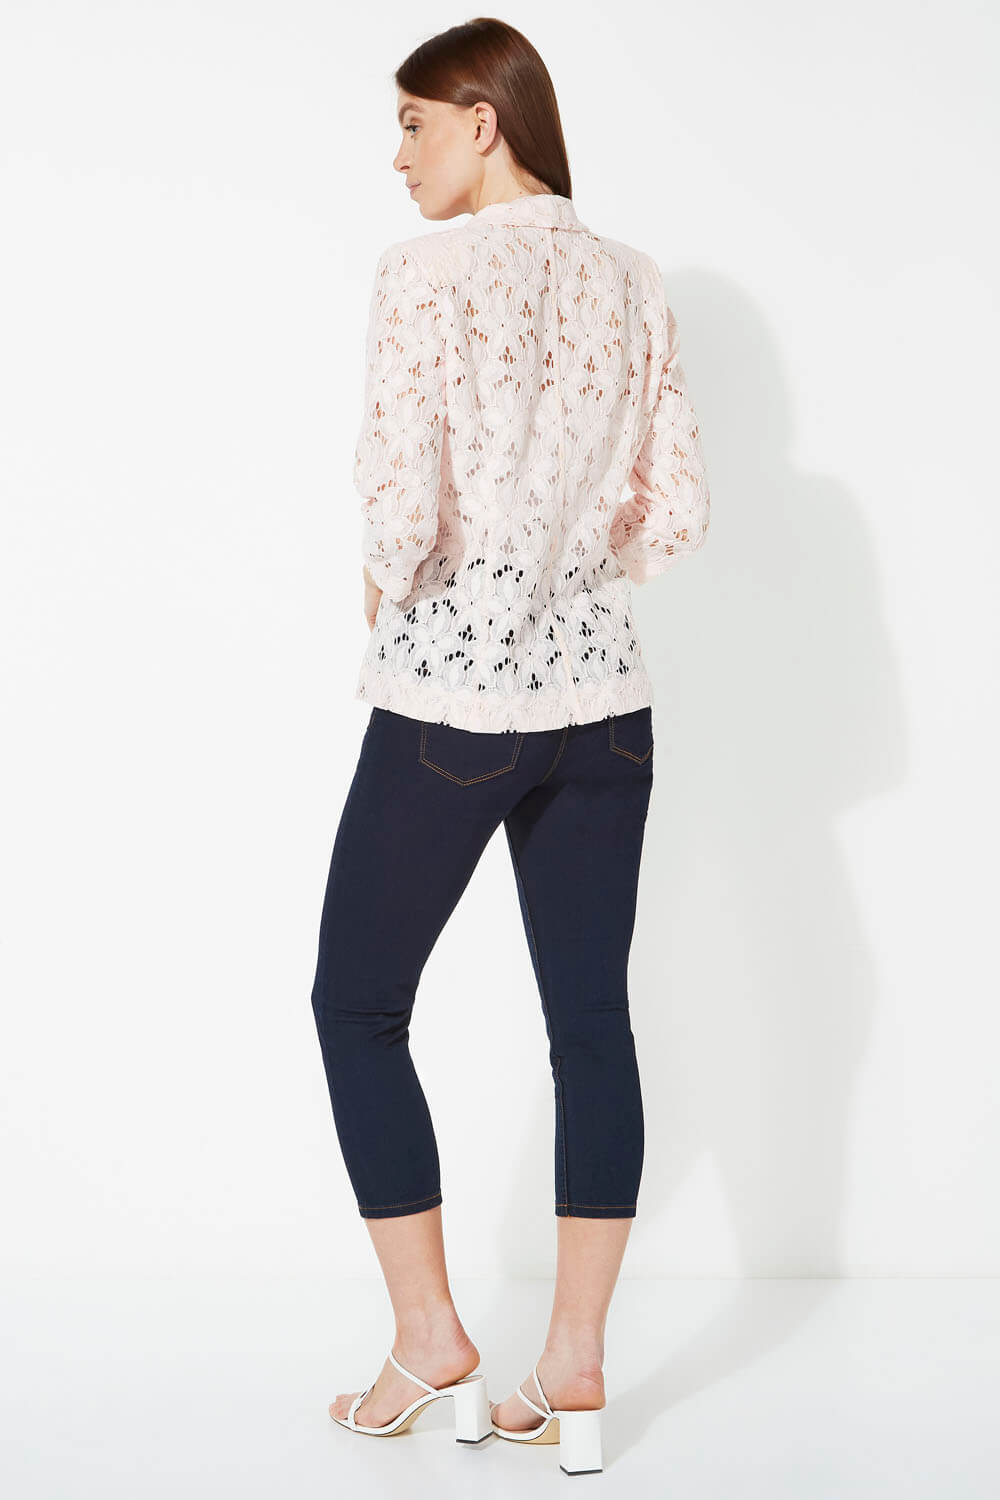 Floral Lace 3/4 Sleeve Jacket